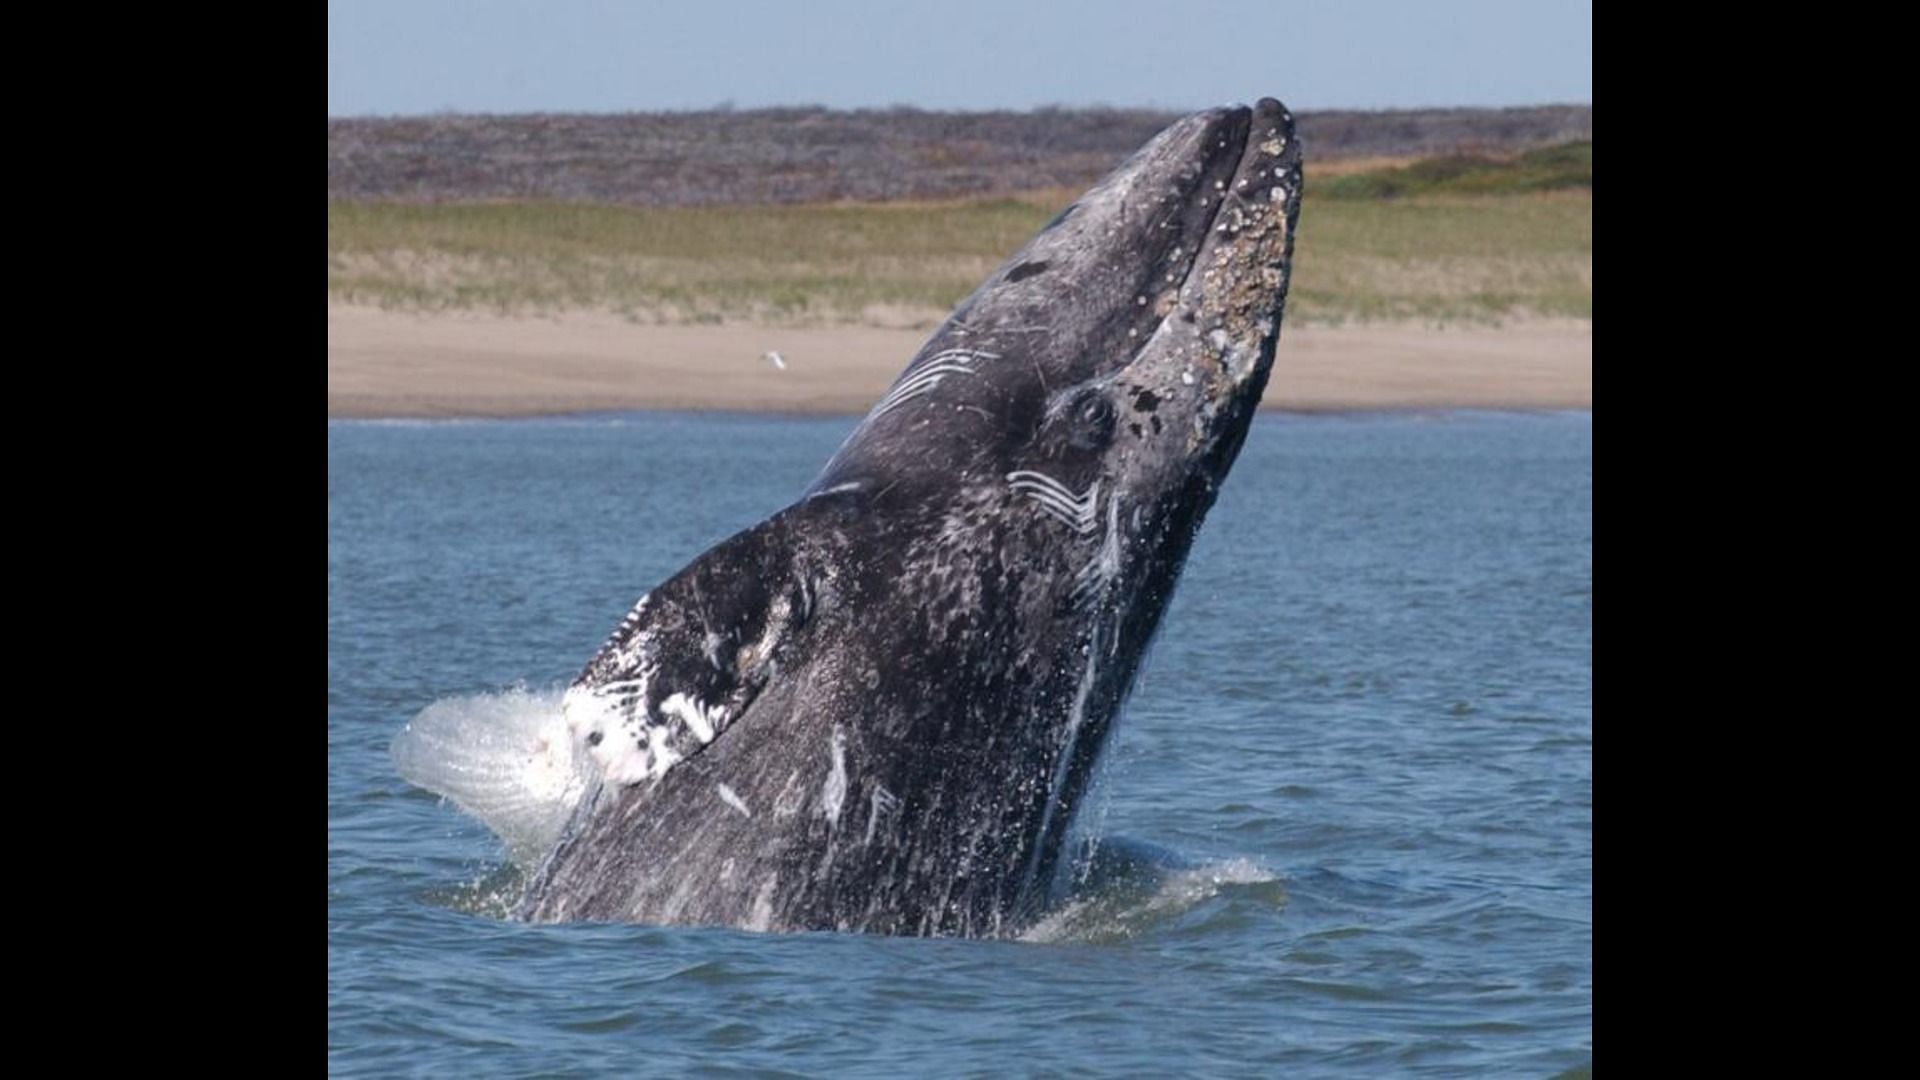 Rare sighting of a gray whale leaves scientists and internet users bewildered: Details explored. (Image via Washington Department of Fish &amp; Wildlife)